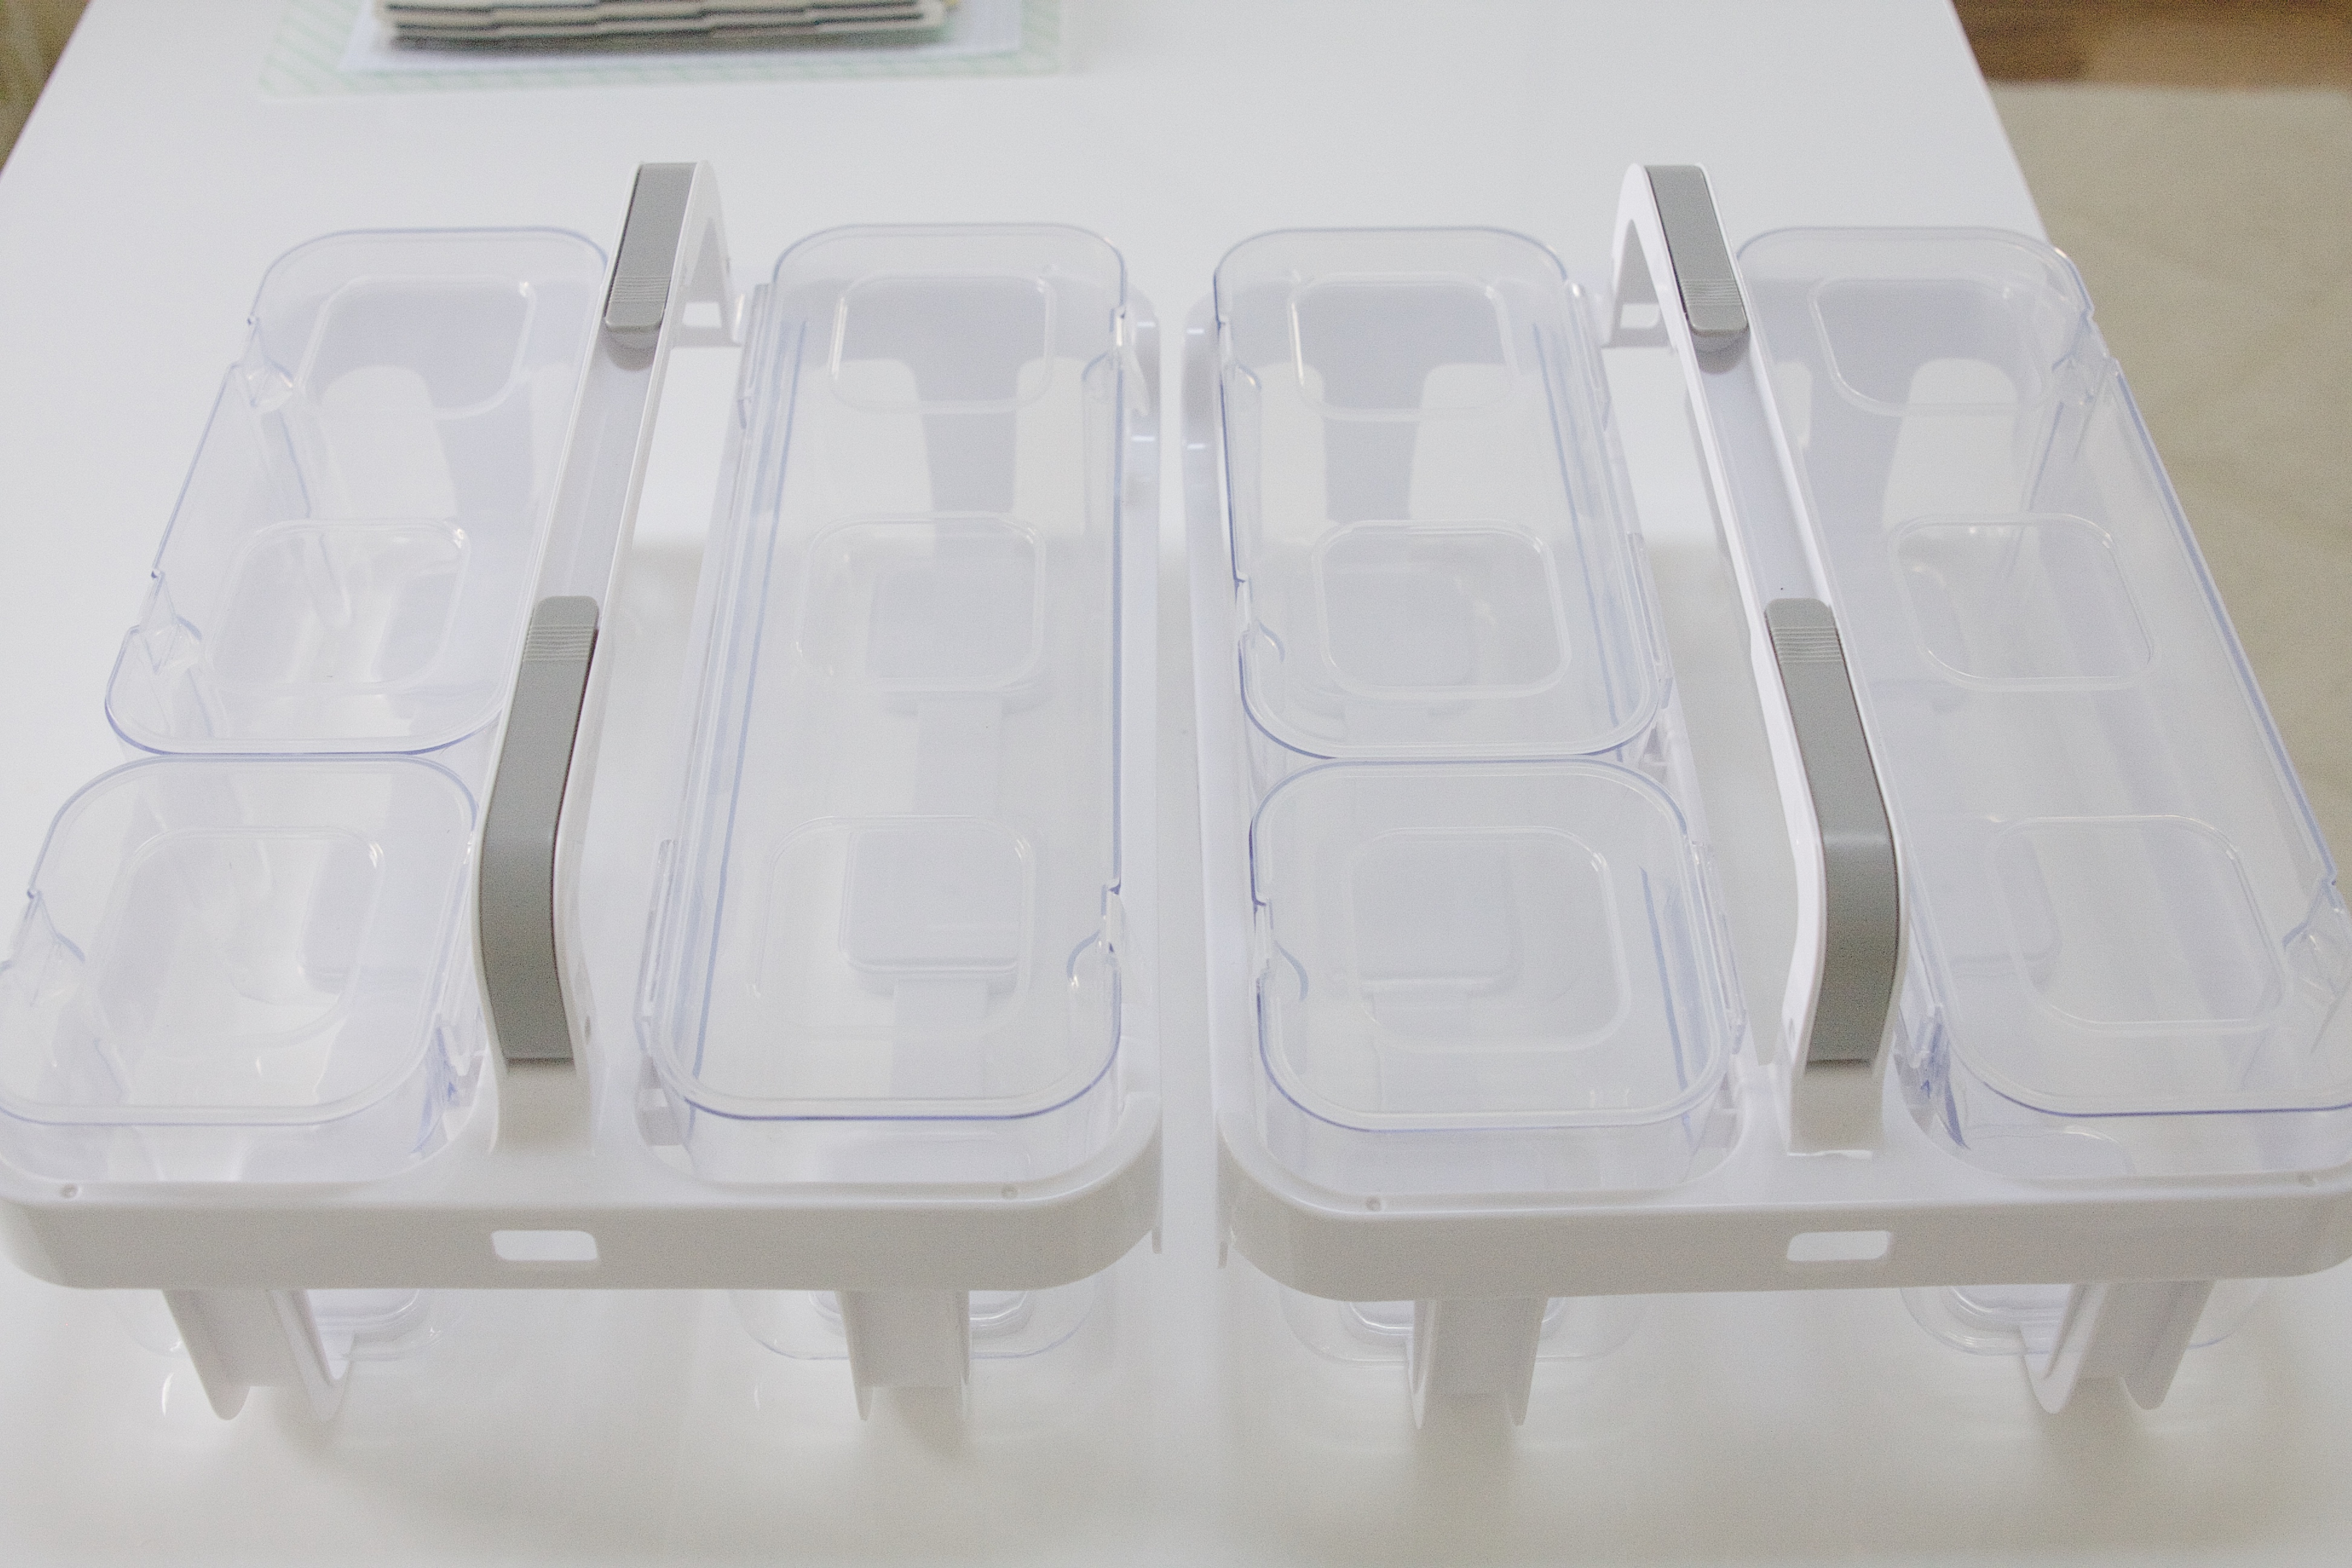 Deflecto White Caddy Organizer with Small Medium and Large Compartments